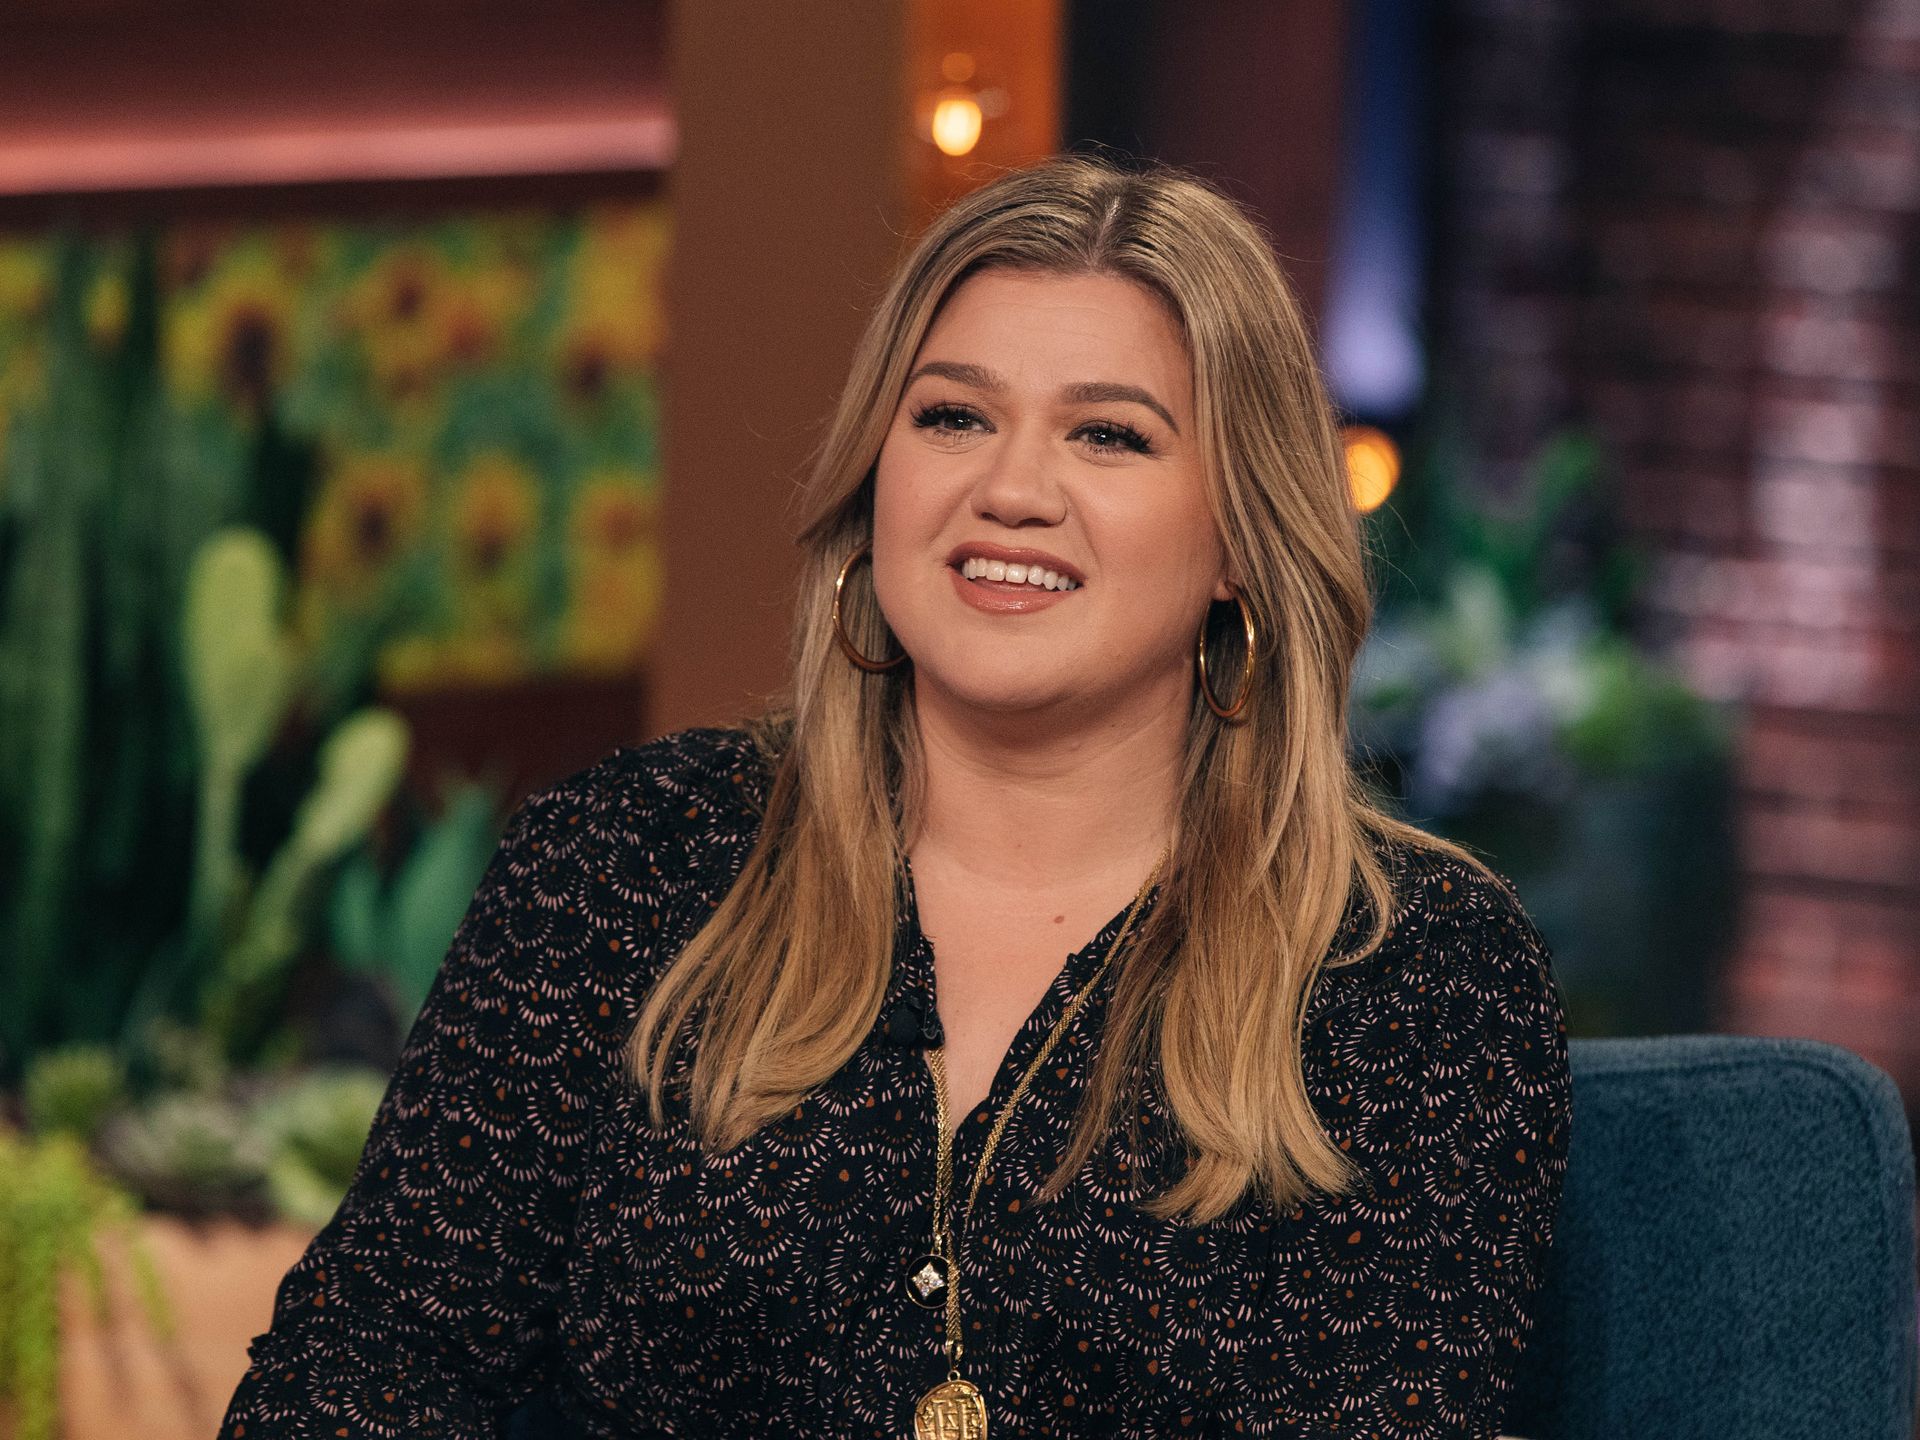 Kelly Clarkson says she was 'blindsided' by 'toxic' work environment